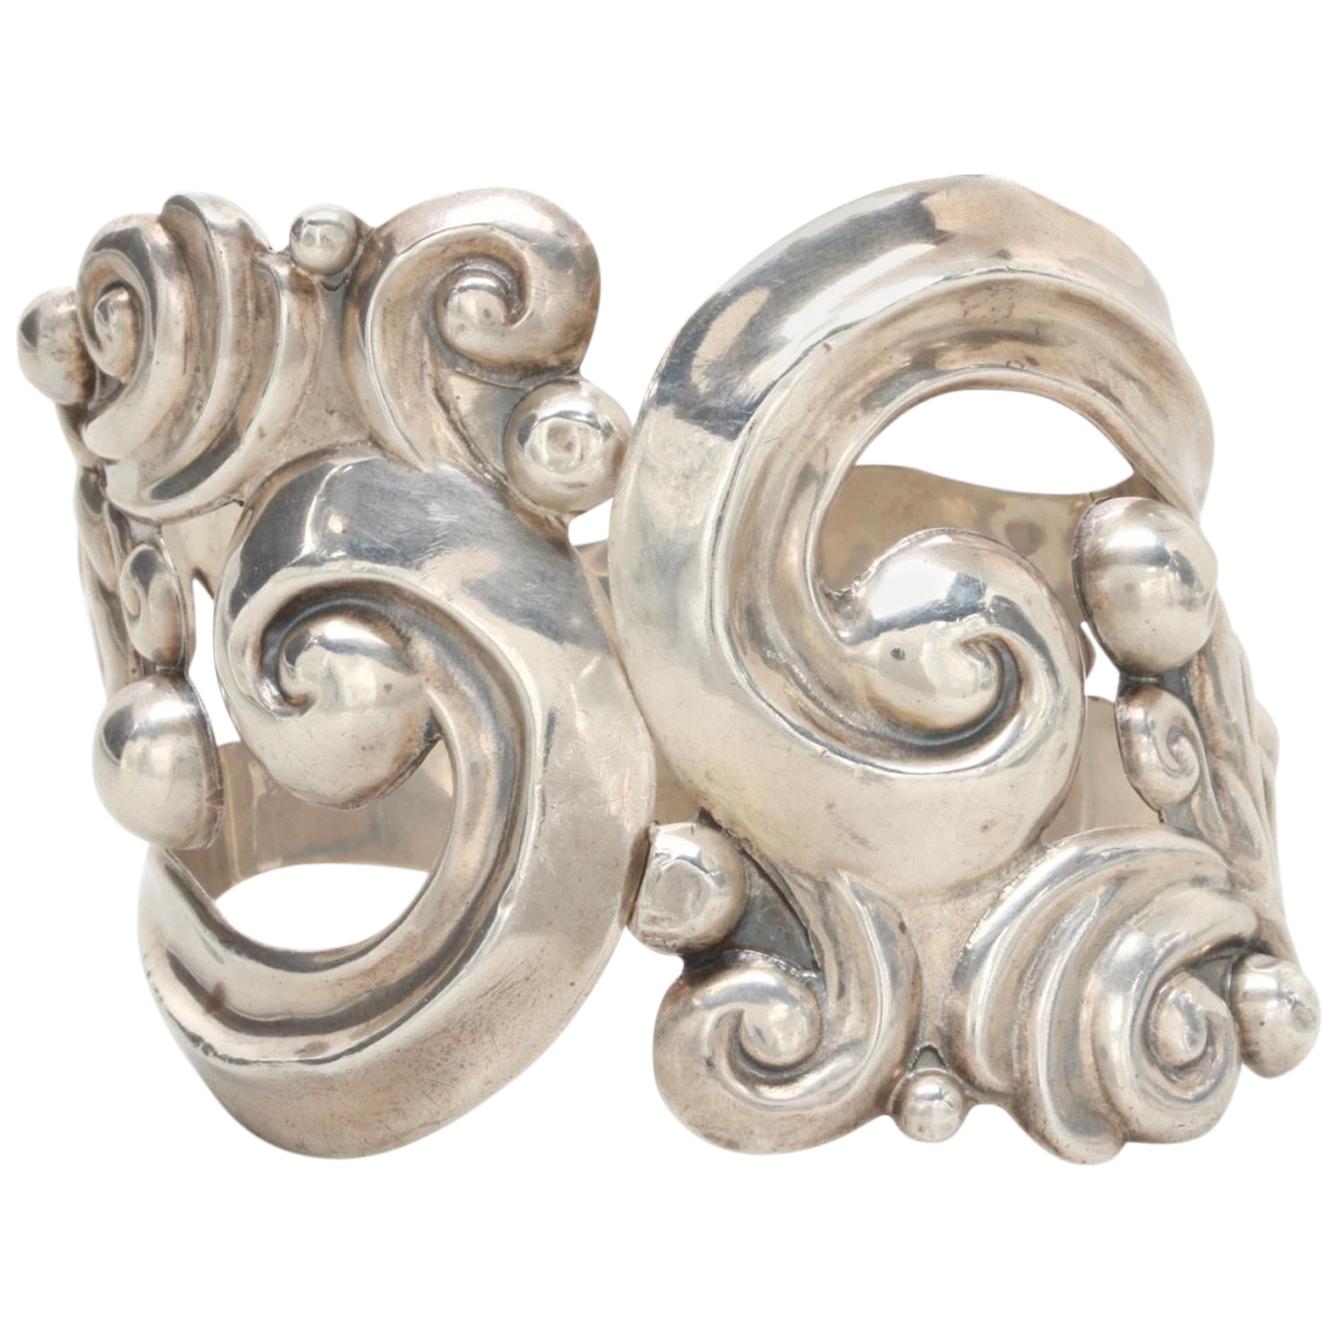 Extraordinary Rare Mexico Sterling 1940s Clamper Bracelet by A. Pineda For Sale